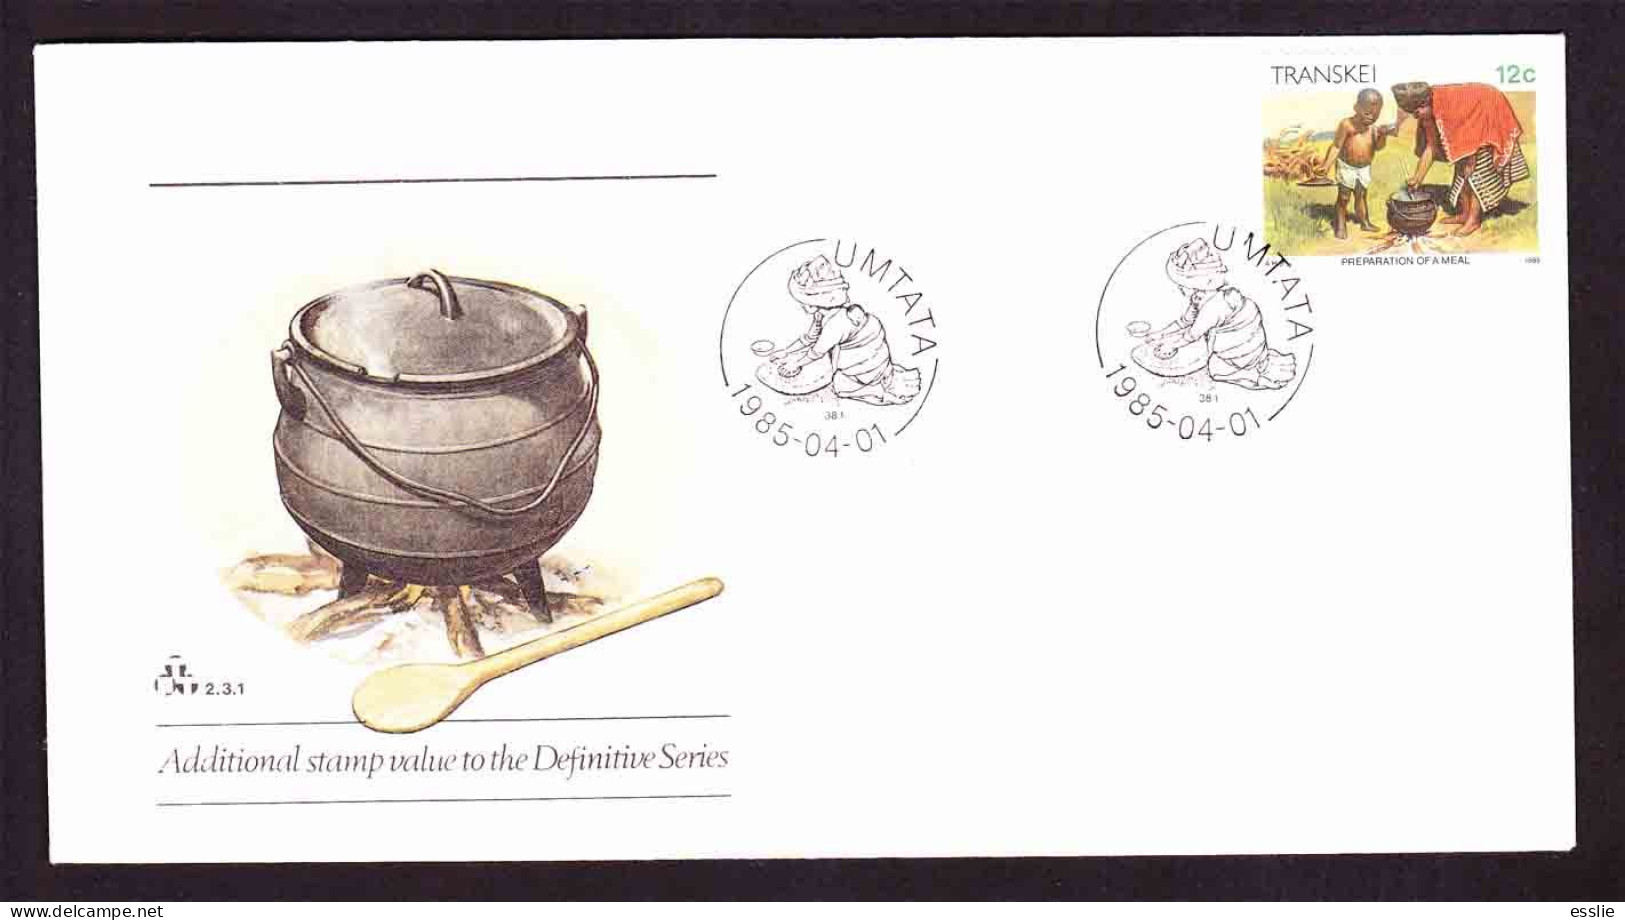 Transkei - 1985 (1984) - Traditions Xhosa Lifestyle Second Definitive - Additional Value Preparation Of A Meal - FDC - Transkei